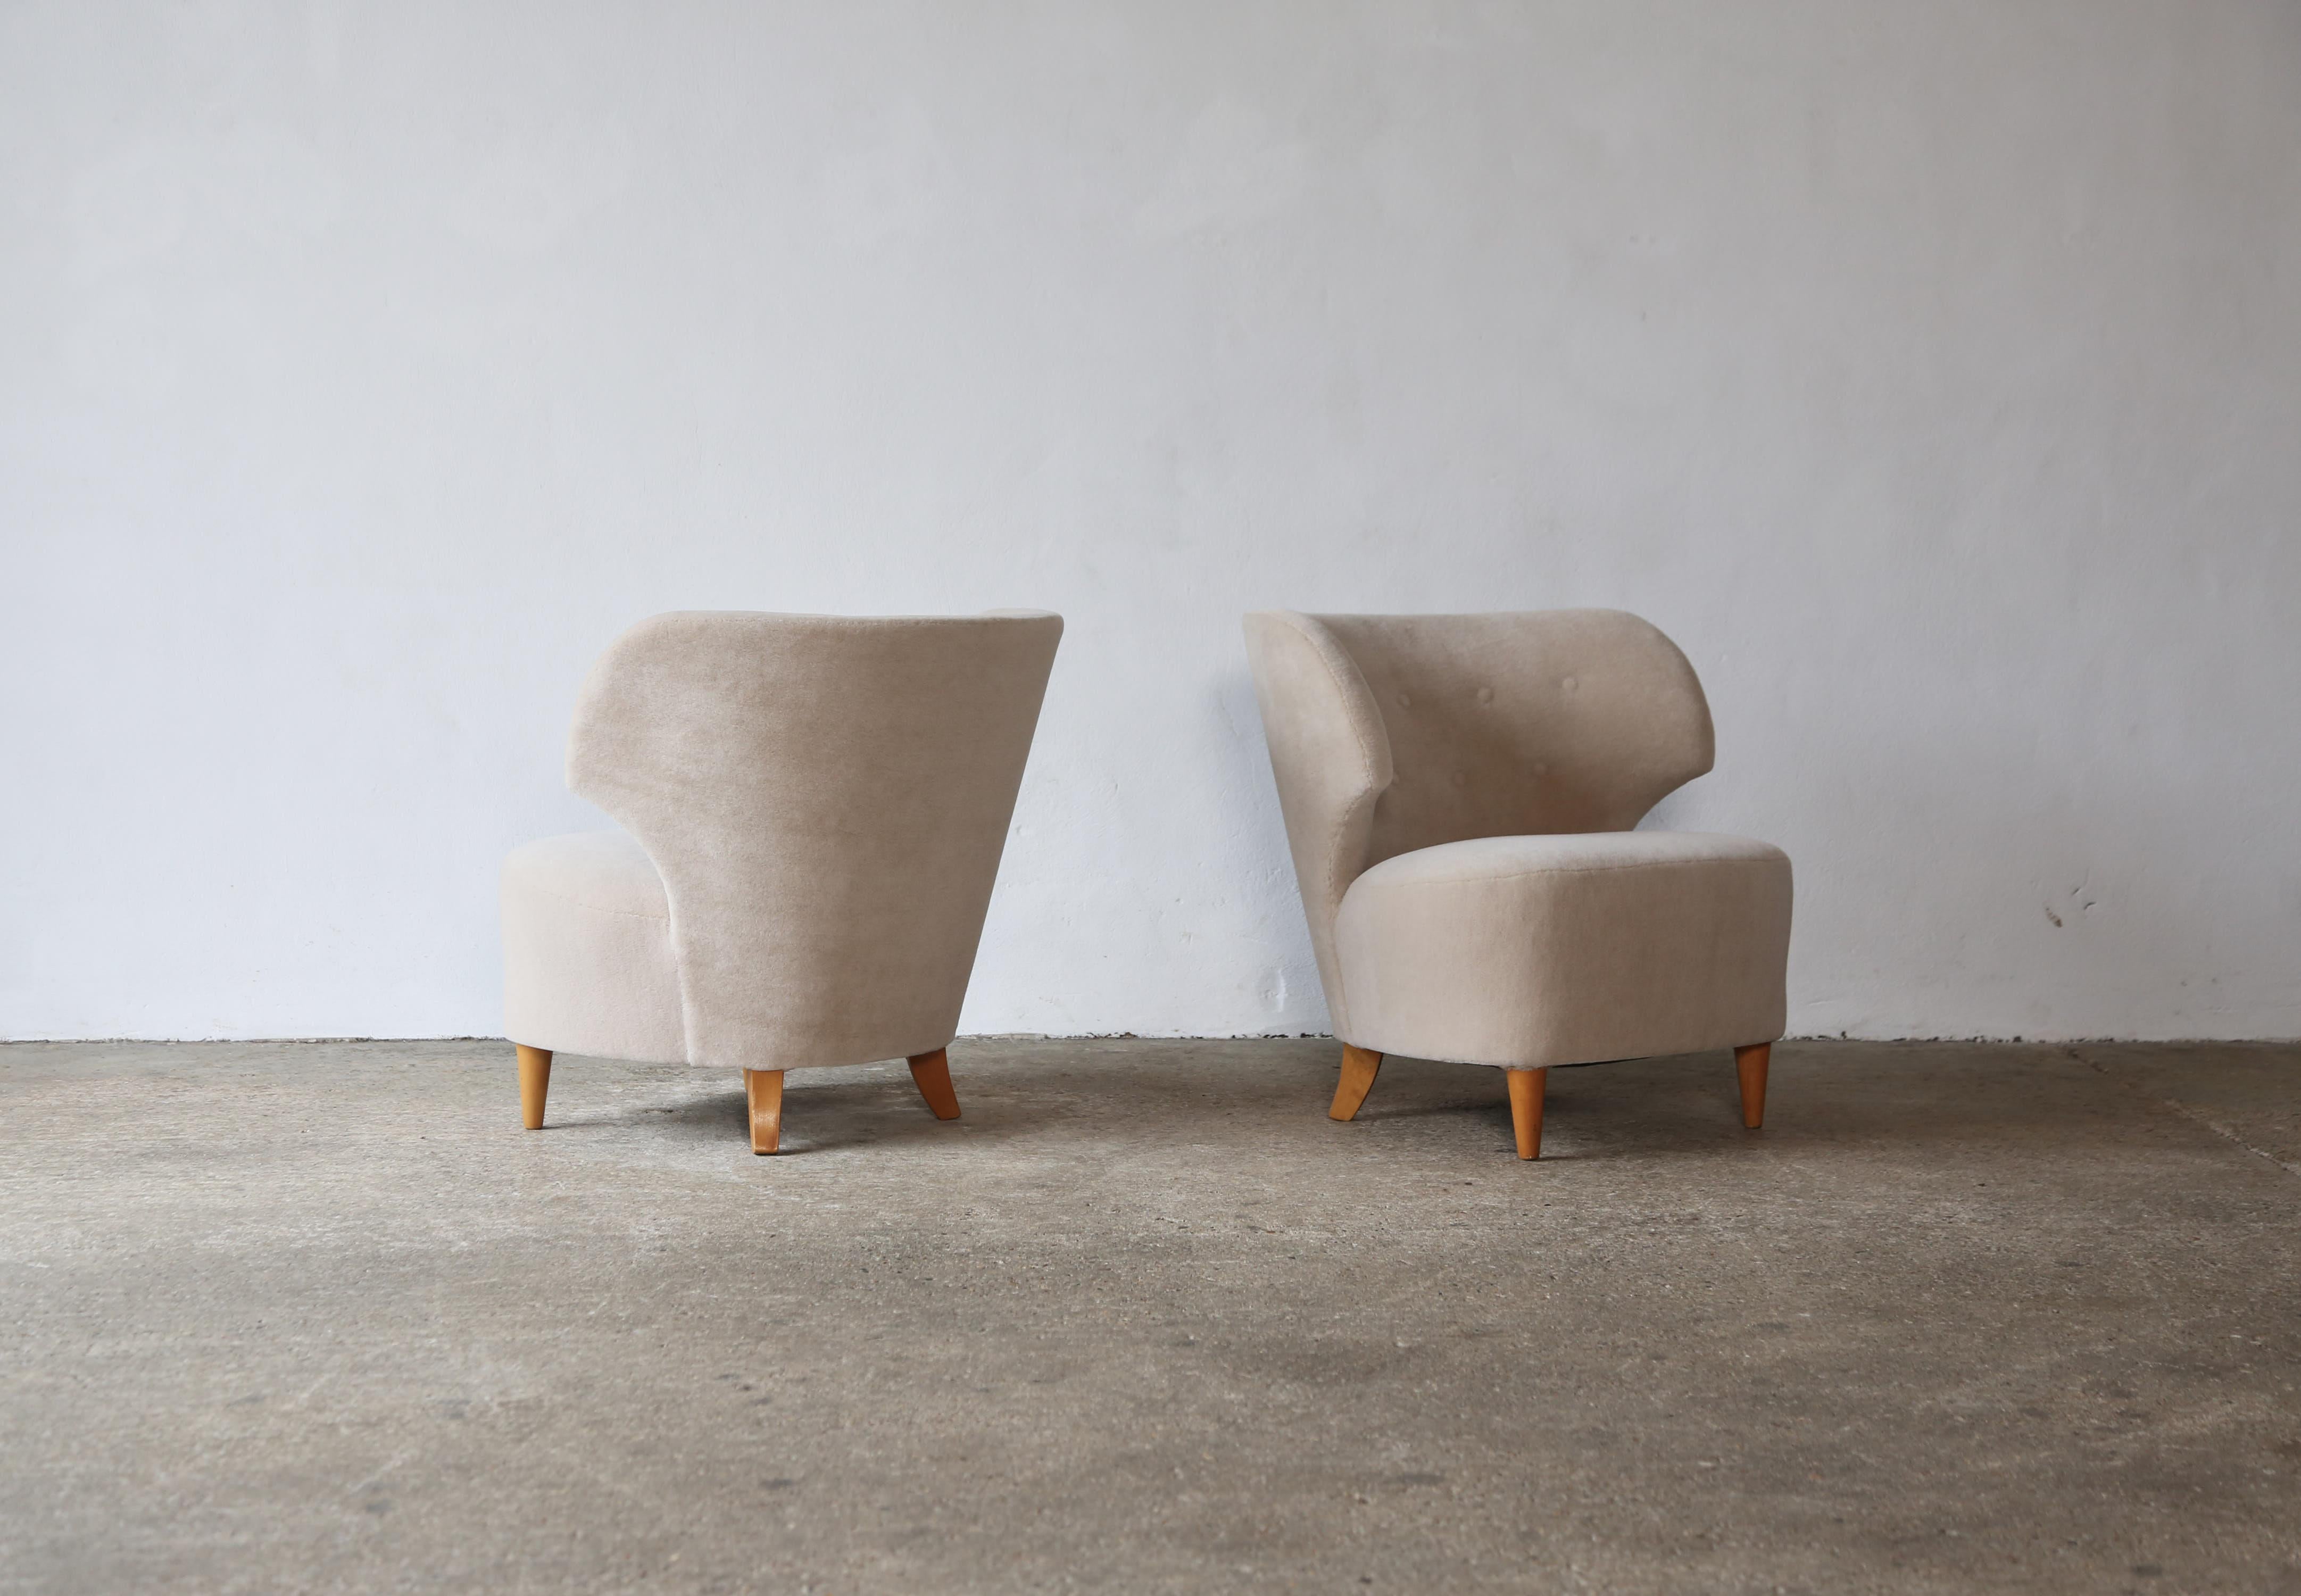 Pair of Carl-Johan Boman Chairs, Finland, 1940s, Newly Upholstered in Alpaca For Sale 2